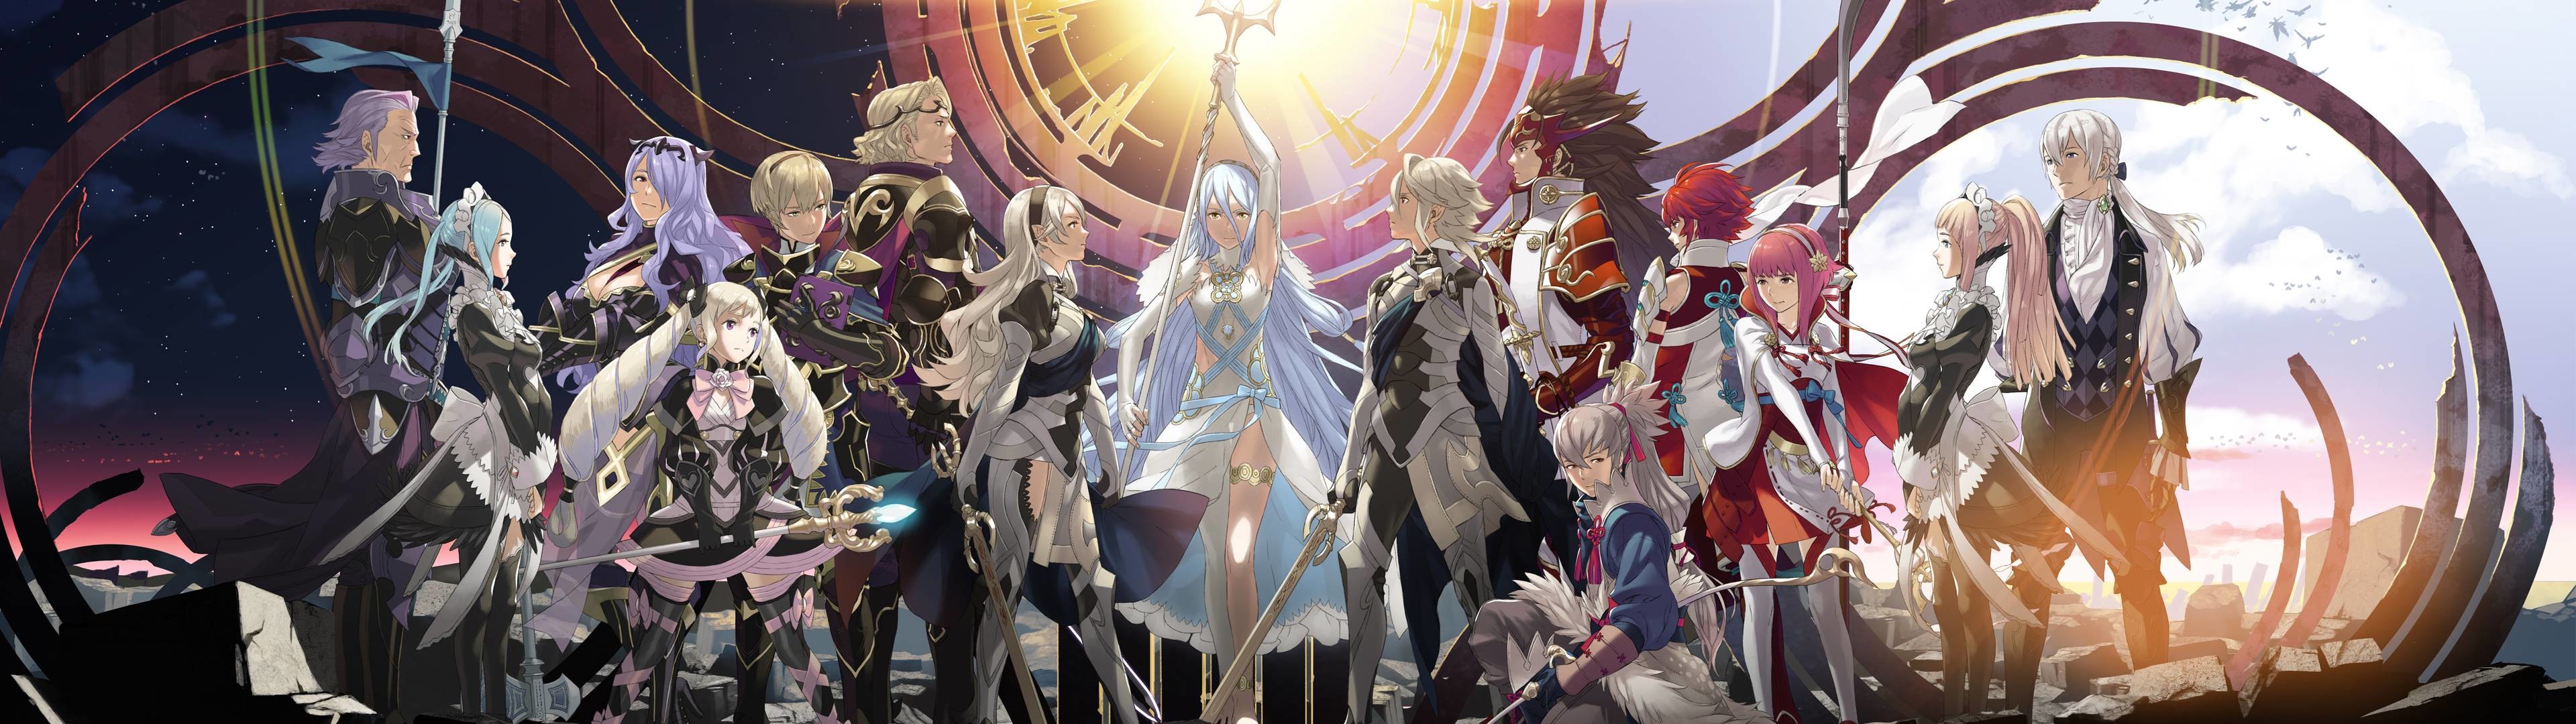 3840x1080 Wanted to share the dual monitor Fates wallpaper I made with all of you.  Enjoy!